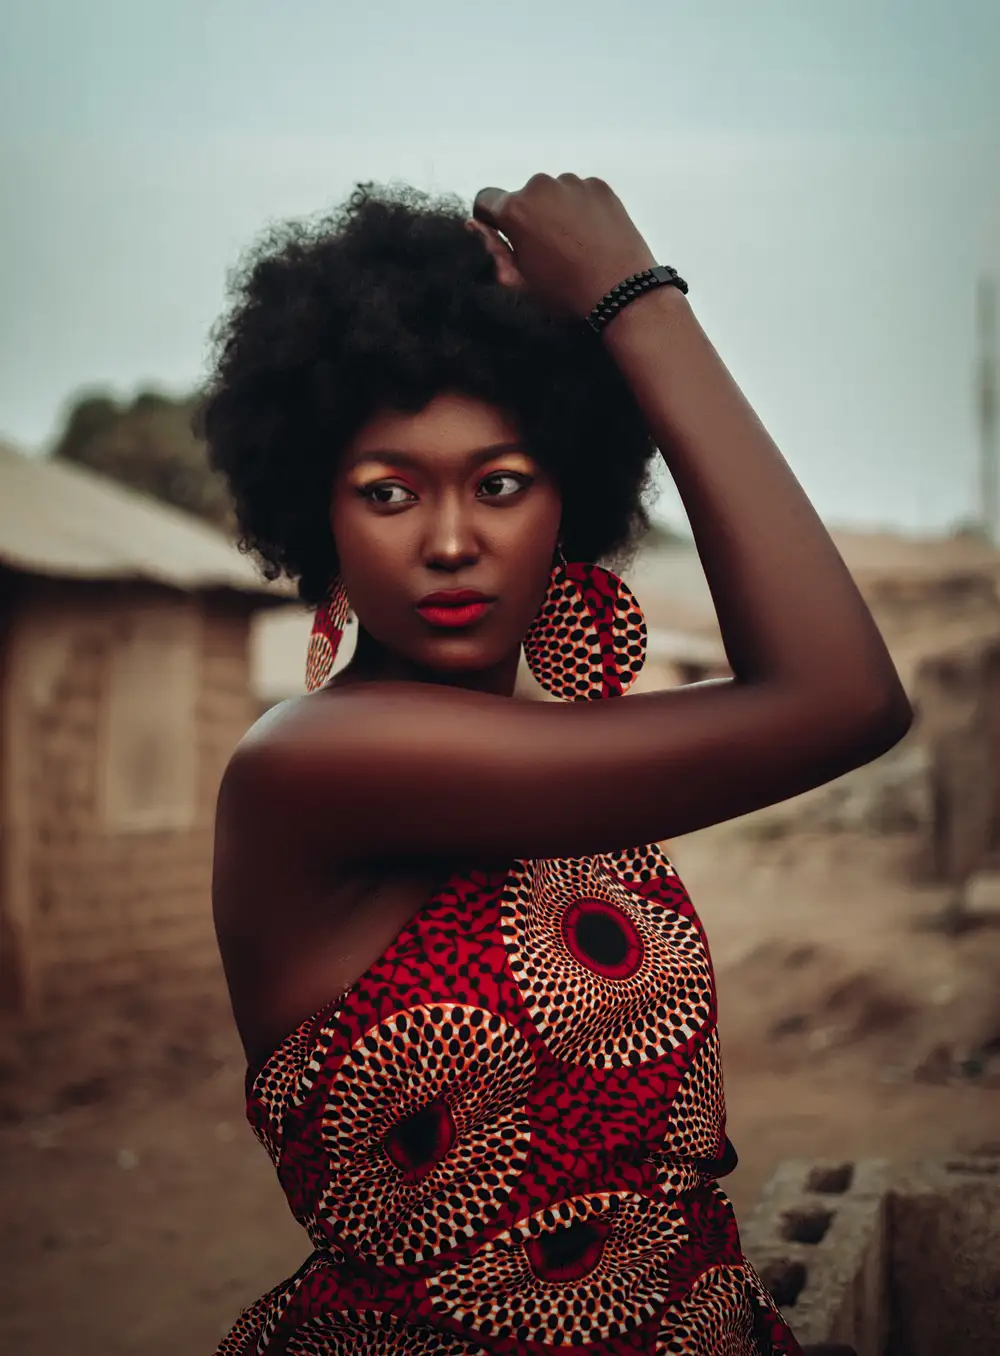 Indigenous lady with Afro hair wearing an African attire